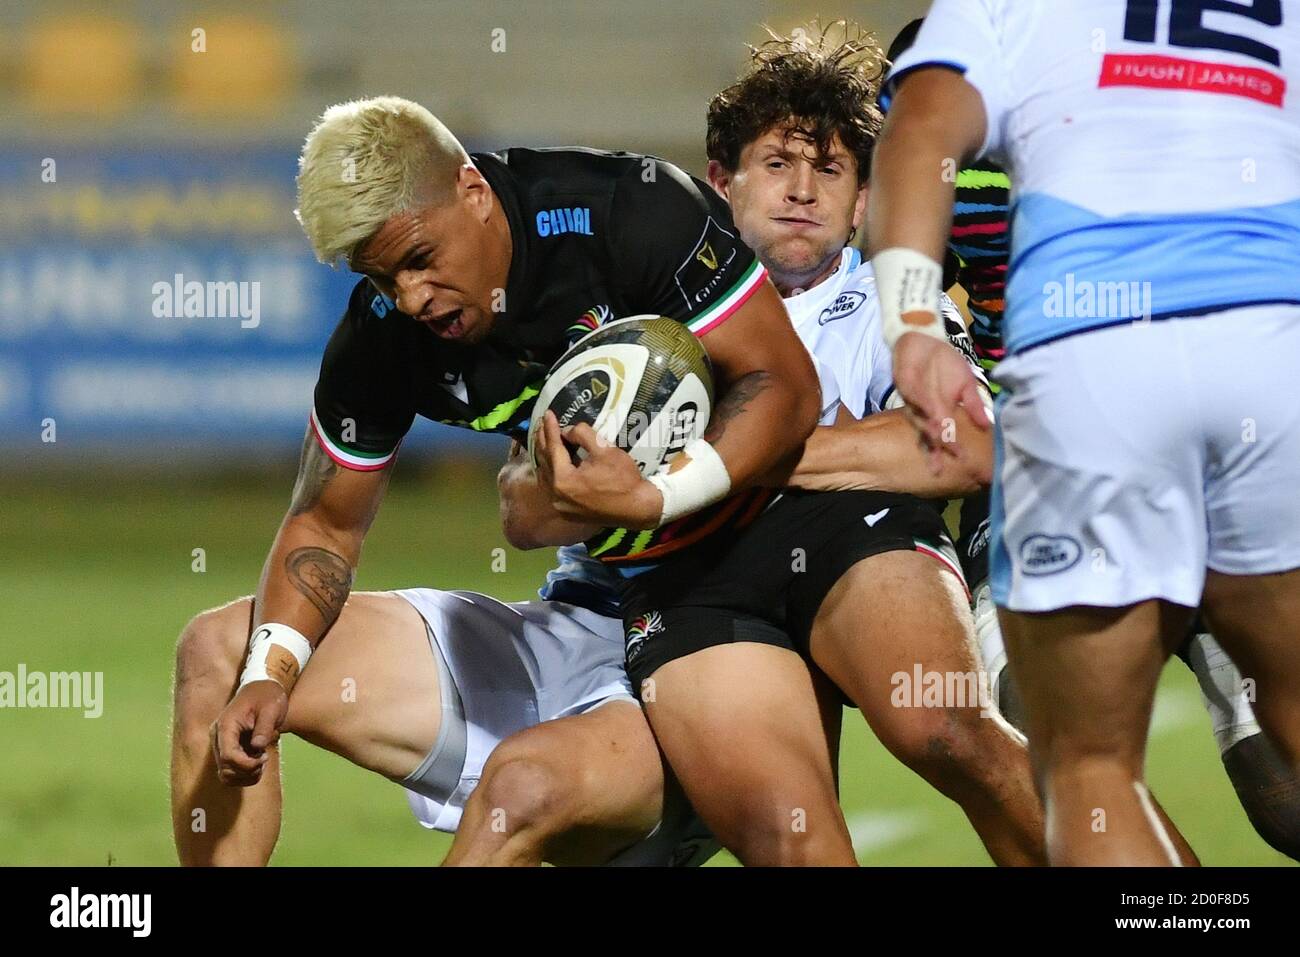 Junior Laloifi (Zebre) stopped by Lloyd Williams (Cardiff Blues) during Zebre vs Cardiff Blues, Rugby Guinness Pro 14, parma, Italy, 02 Oct 2020 Stock Photo